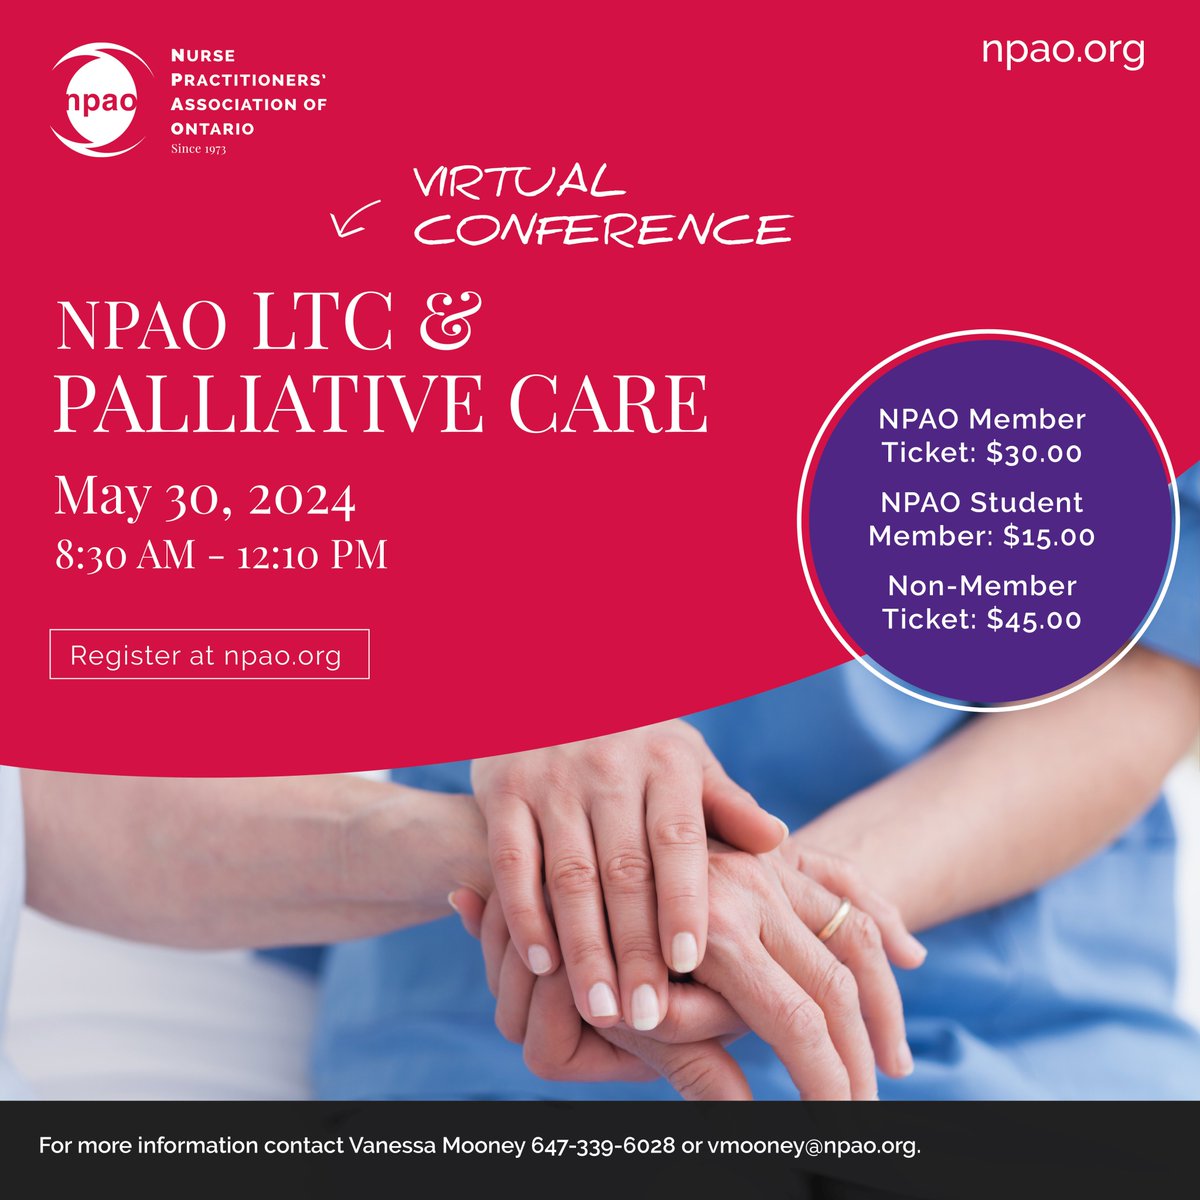 Join us for the #LTC & #Palliative Nurse Practitioner (#NP) Virtual Conference! Dive into enriching discussions, network with industry experts & elevate your skills in LTC & Palliative Care. Don't miss out! May 30 @ 8:30 am – 12:10 pm. Register Now: npao.org/calendar-of-ev…